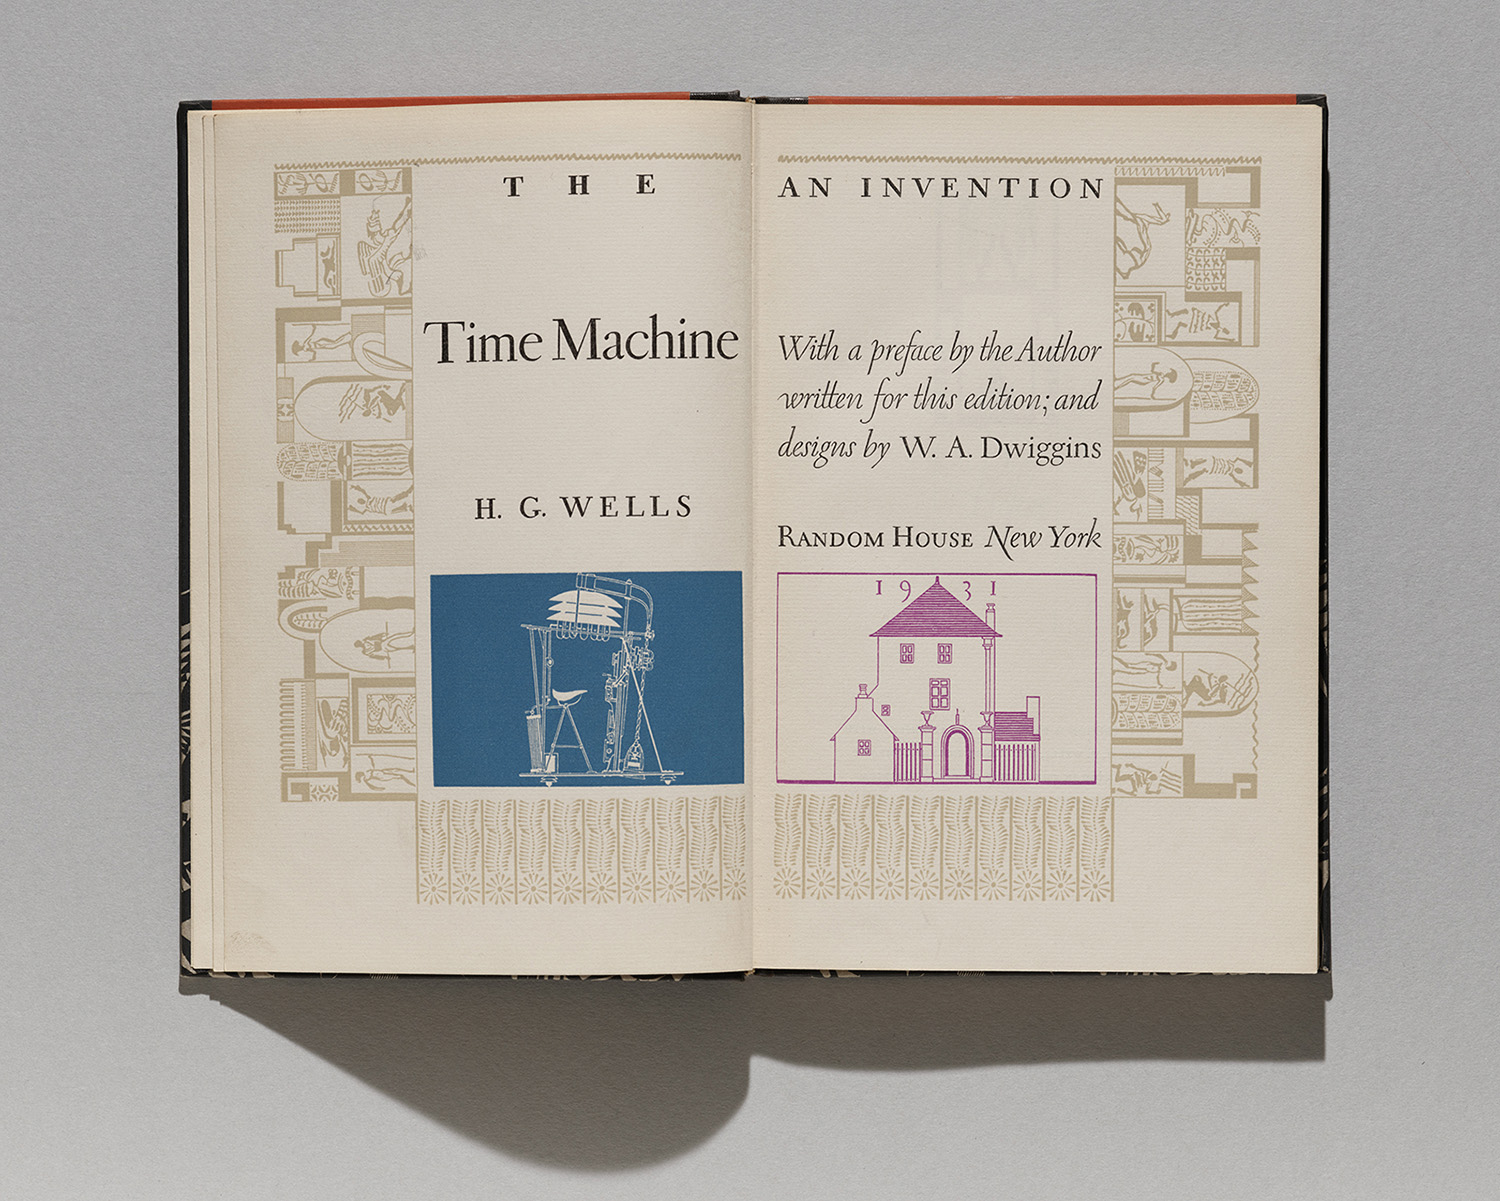 Title page from The Time Machine by H. G. Wells